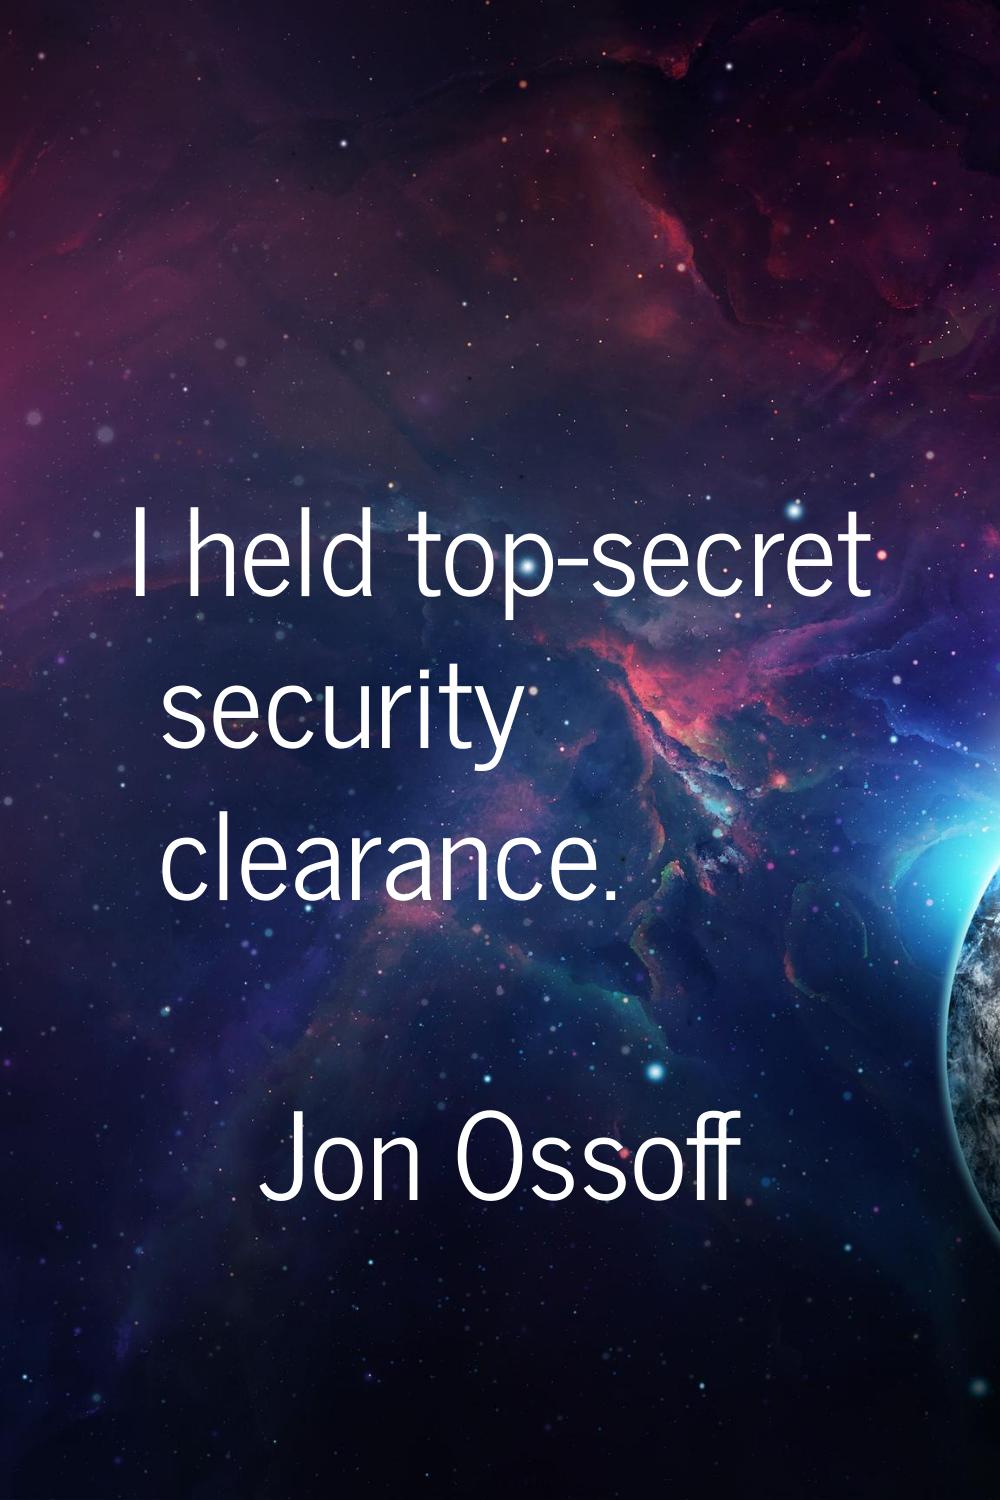 I held top-secret security clearance.